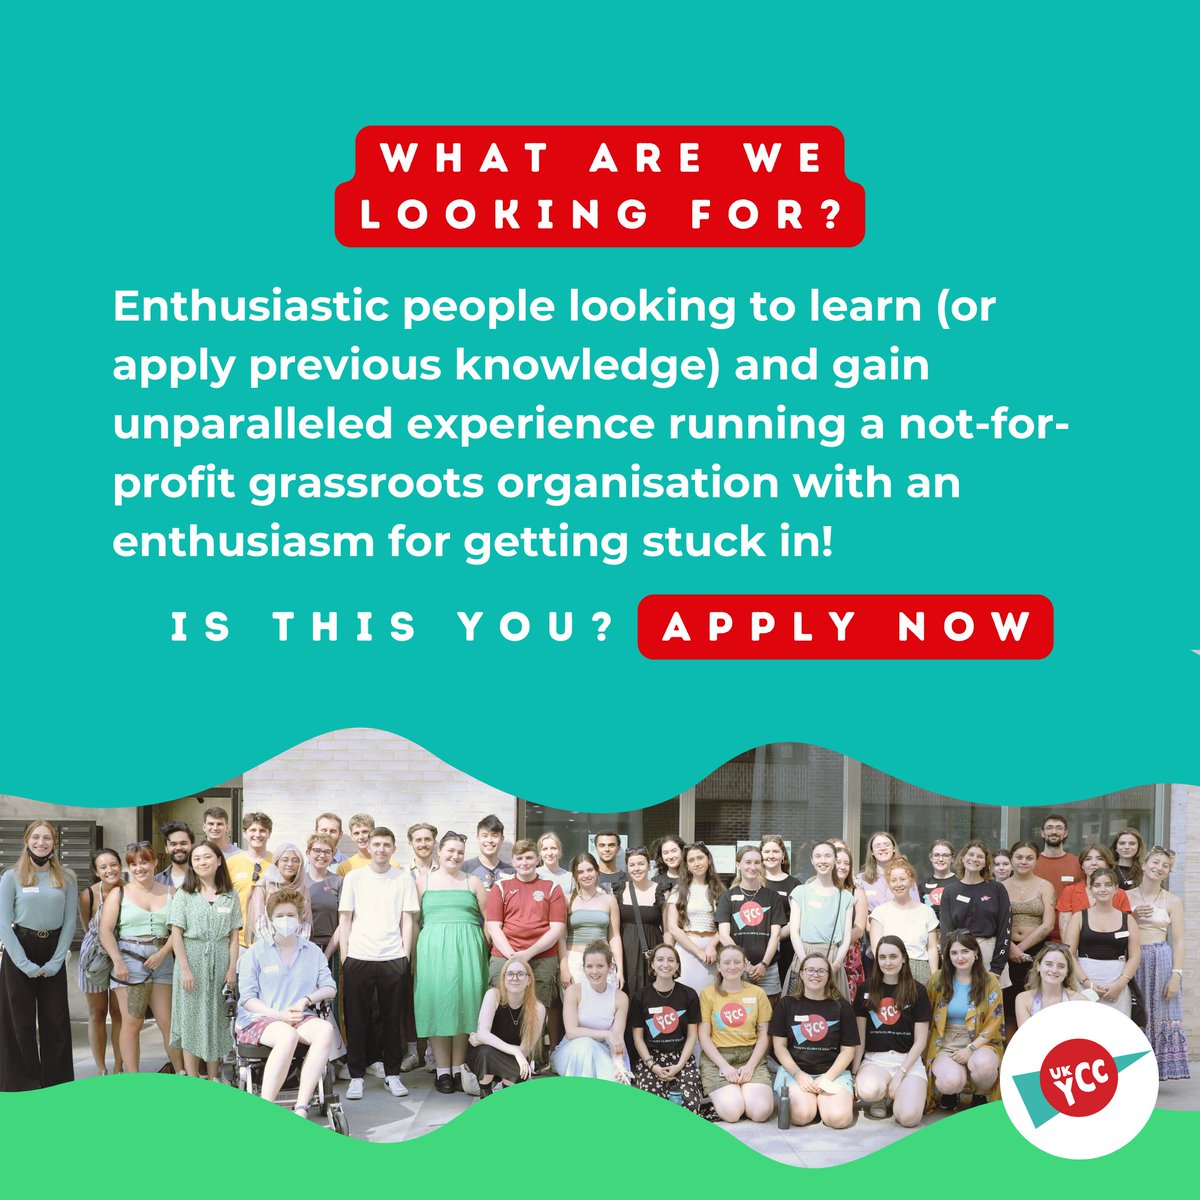 Want to be involved in the day-to-day running of a climate justice organisation? This could be the Working Group for you. Find out more about our Operations Working Group👉 Applications close midnight on the 21st April #climatejustice #volunteeropportunities